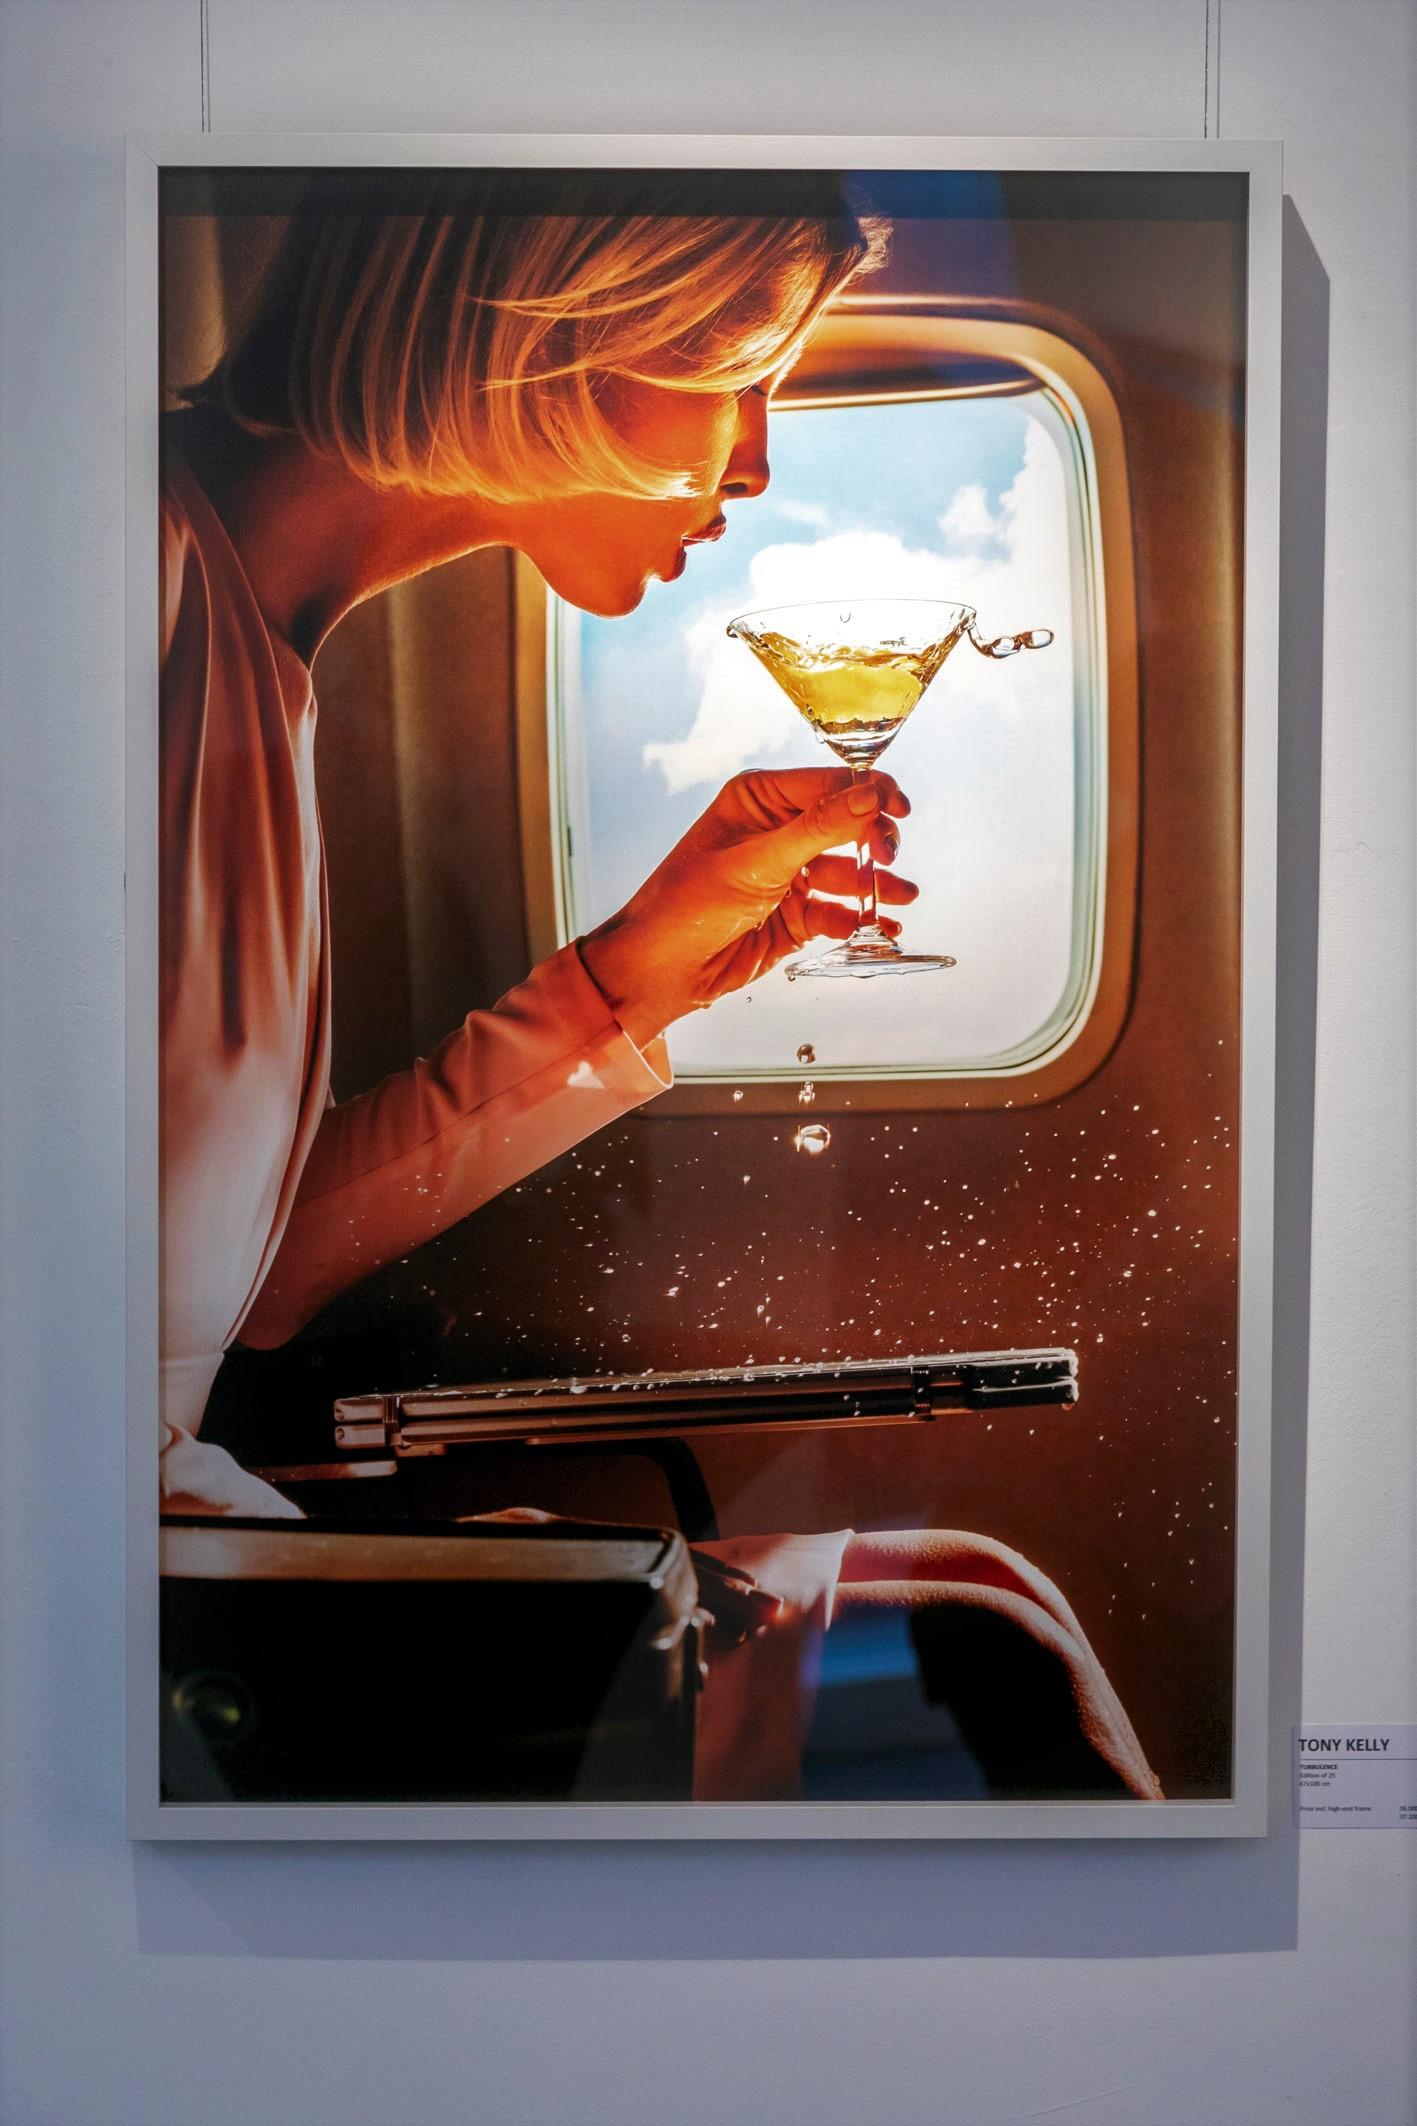 Turbulence - woman spilling champagne in an airplane, fine art photography, 2019 - Photograph by Tony Kelly